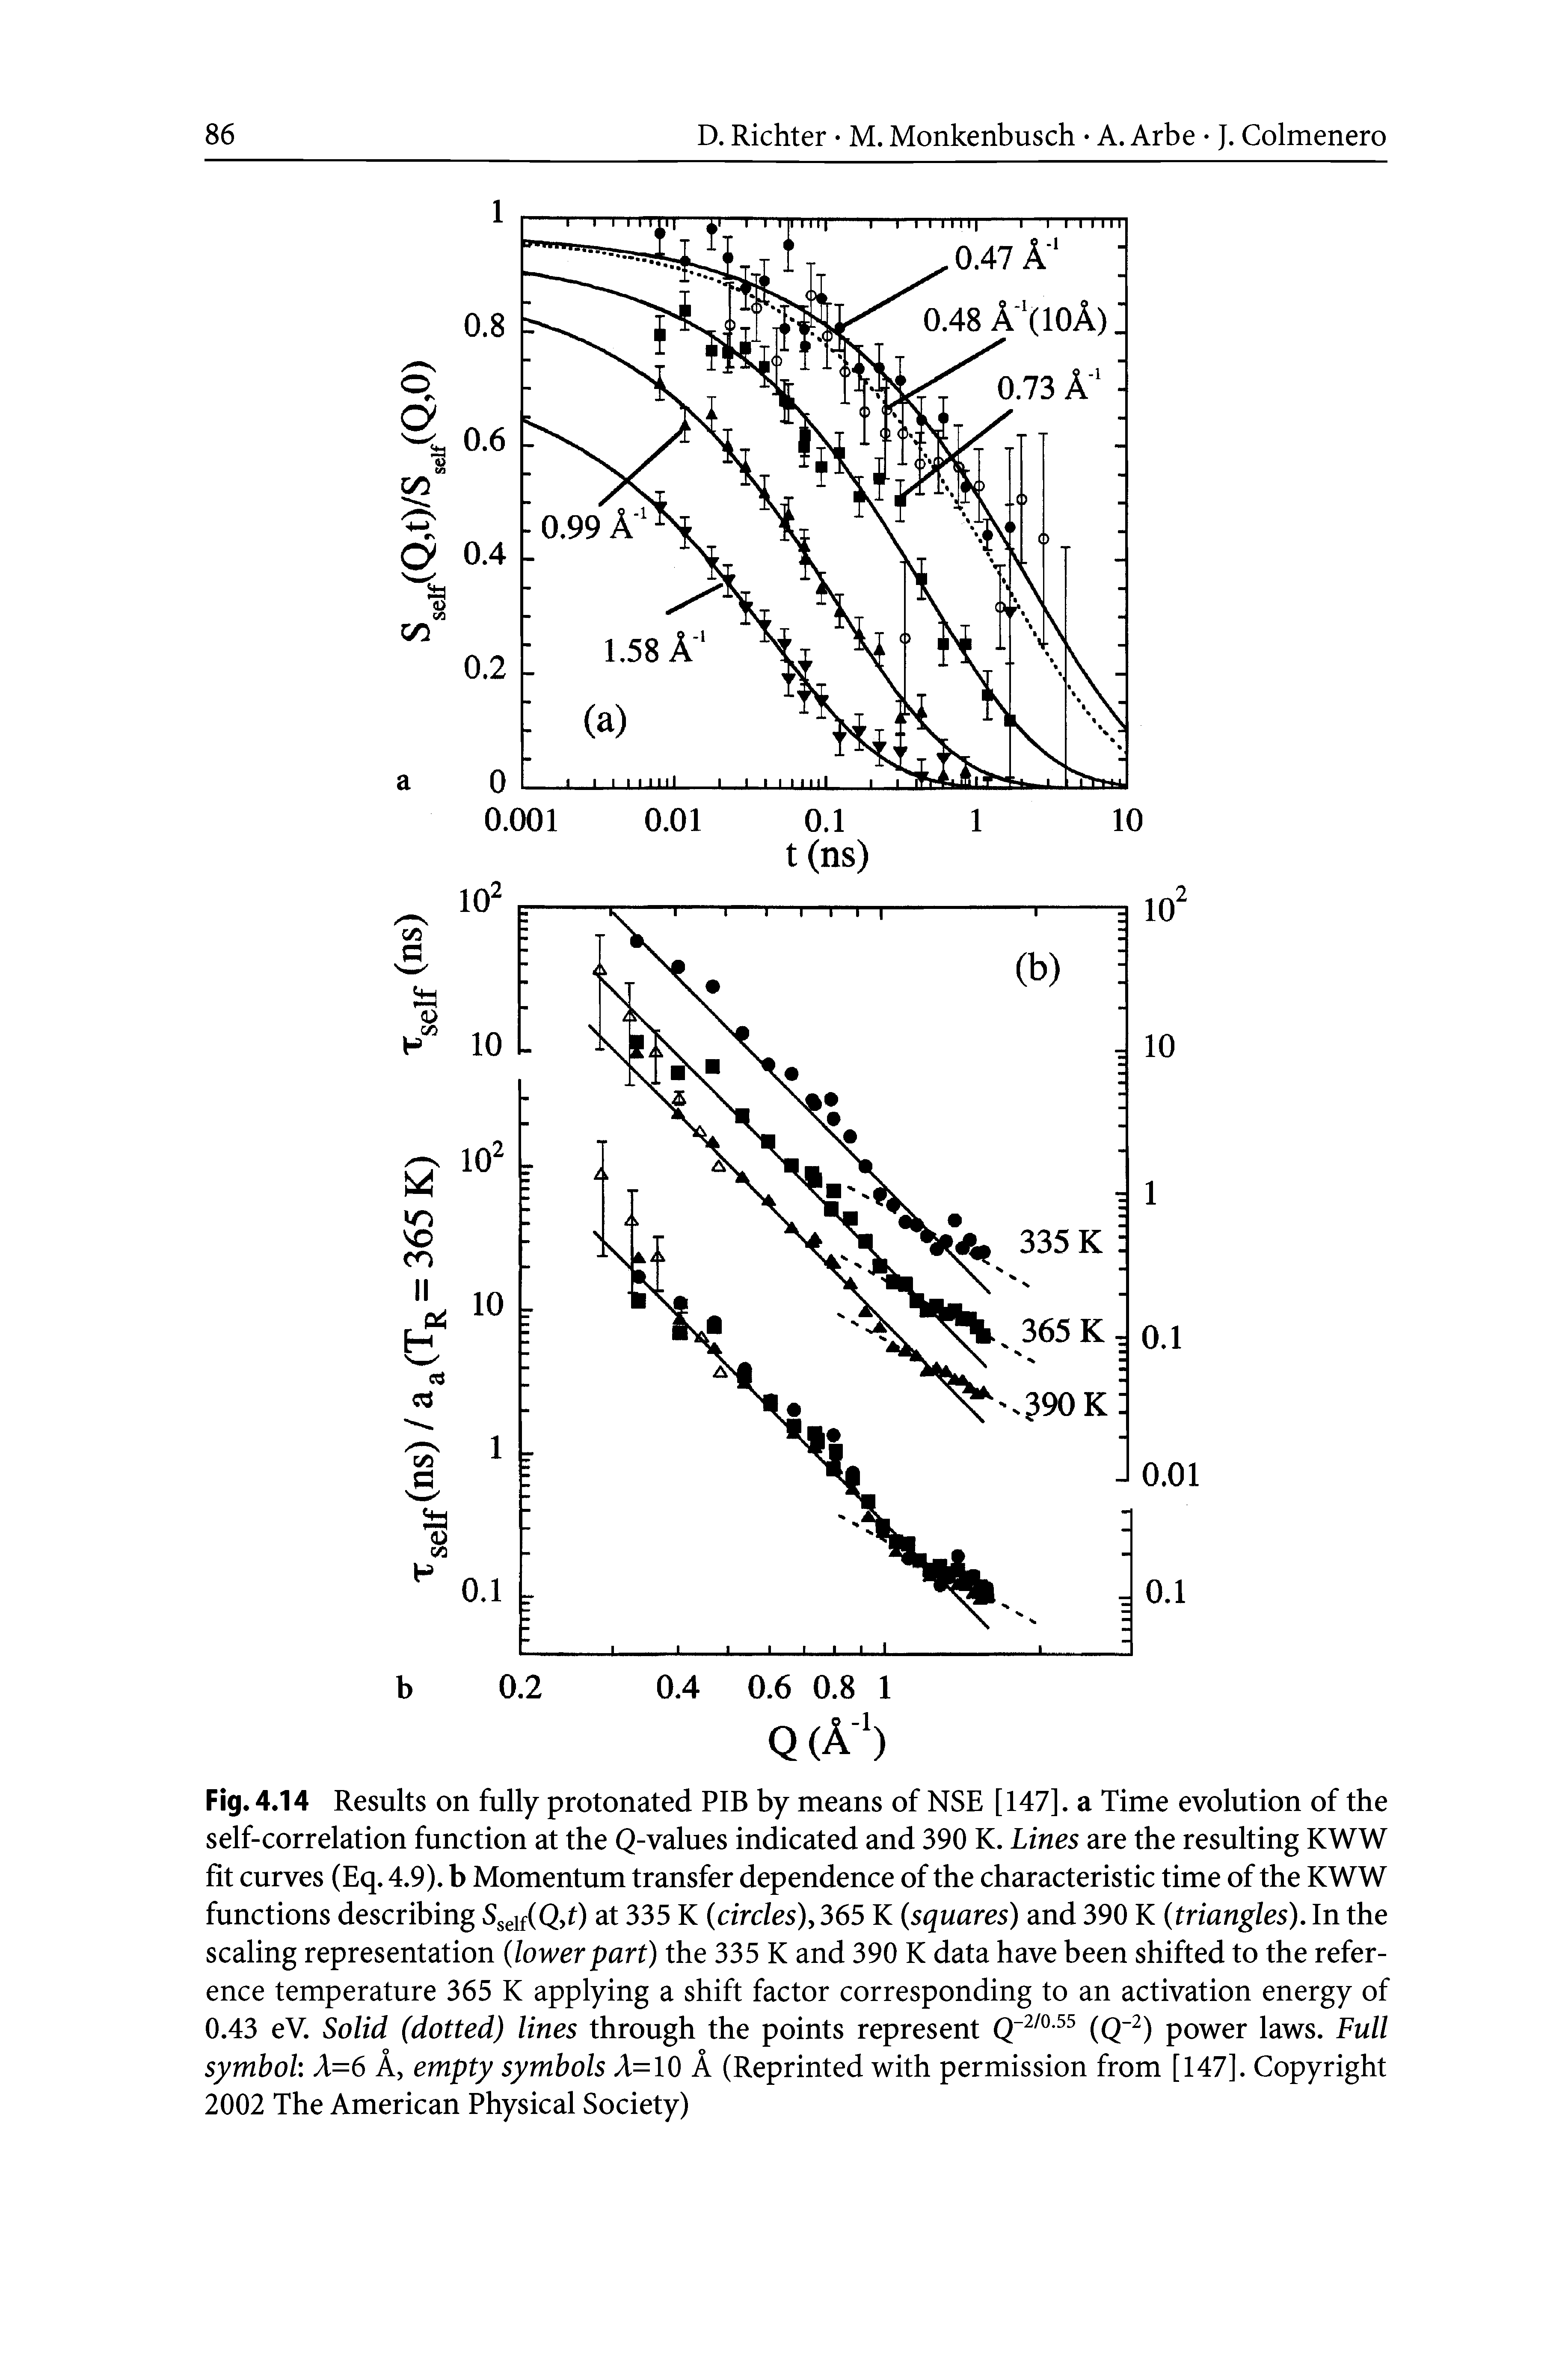 Fig. 4.14 Results on fully protonated PIB by means of NSE [147]. a Time evolution of the self-correlation function at the Q-values indicated and 390 K. Lines are the resulting KWW fit curves (Eq. 4.9). b Momentum transfer dependence of the characteristic time of the KWW functions describing Sseif(Q,t) at 335 K (circles), 365 K (squares) and 390 K (triangles). In the scaling representation (lower part) the 335 K and 390 K data have been shifted to the reference temperature 365 K applying a shift factor corresponding to an activation energy of 0.43 eV. Solid (dotted) lines through the points represent (q-2 power laws. Full...